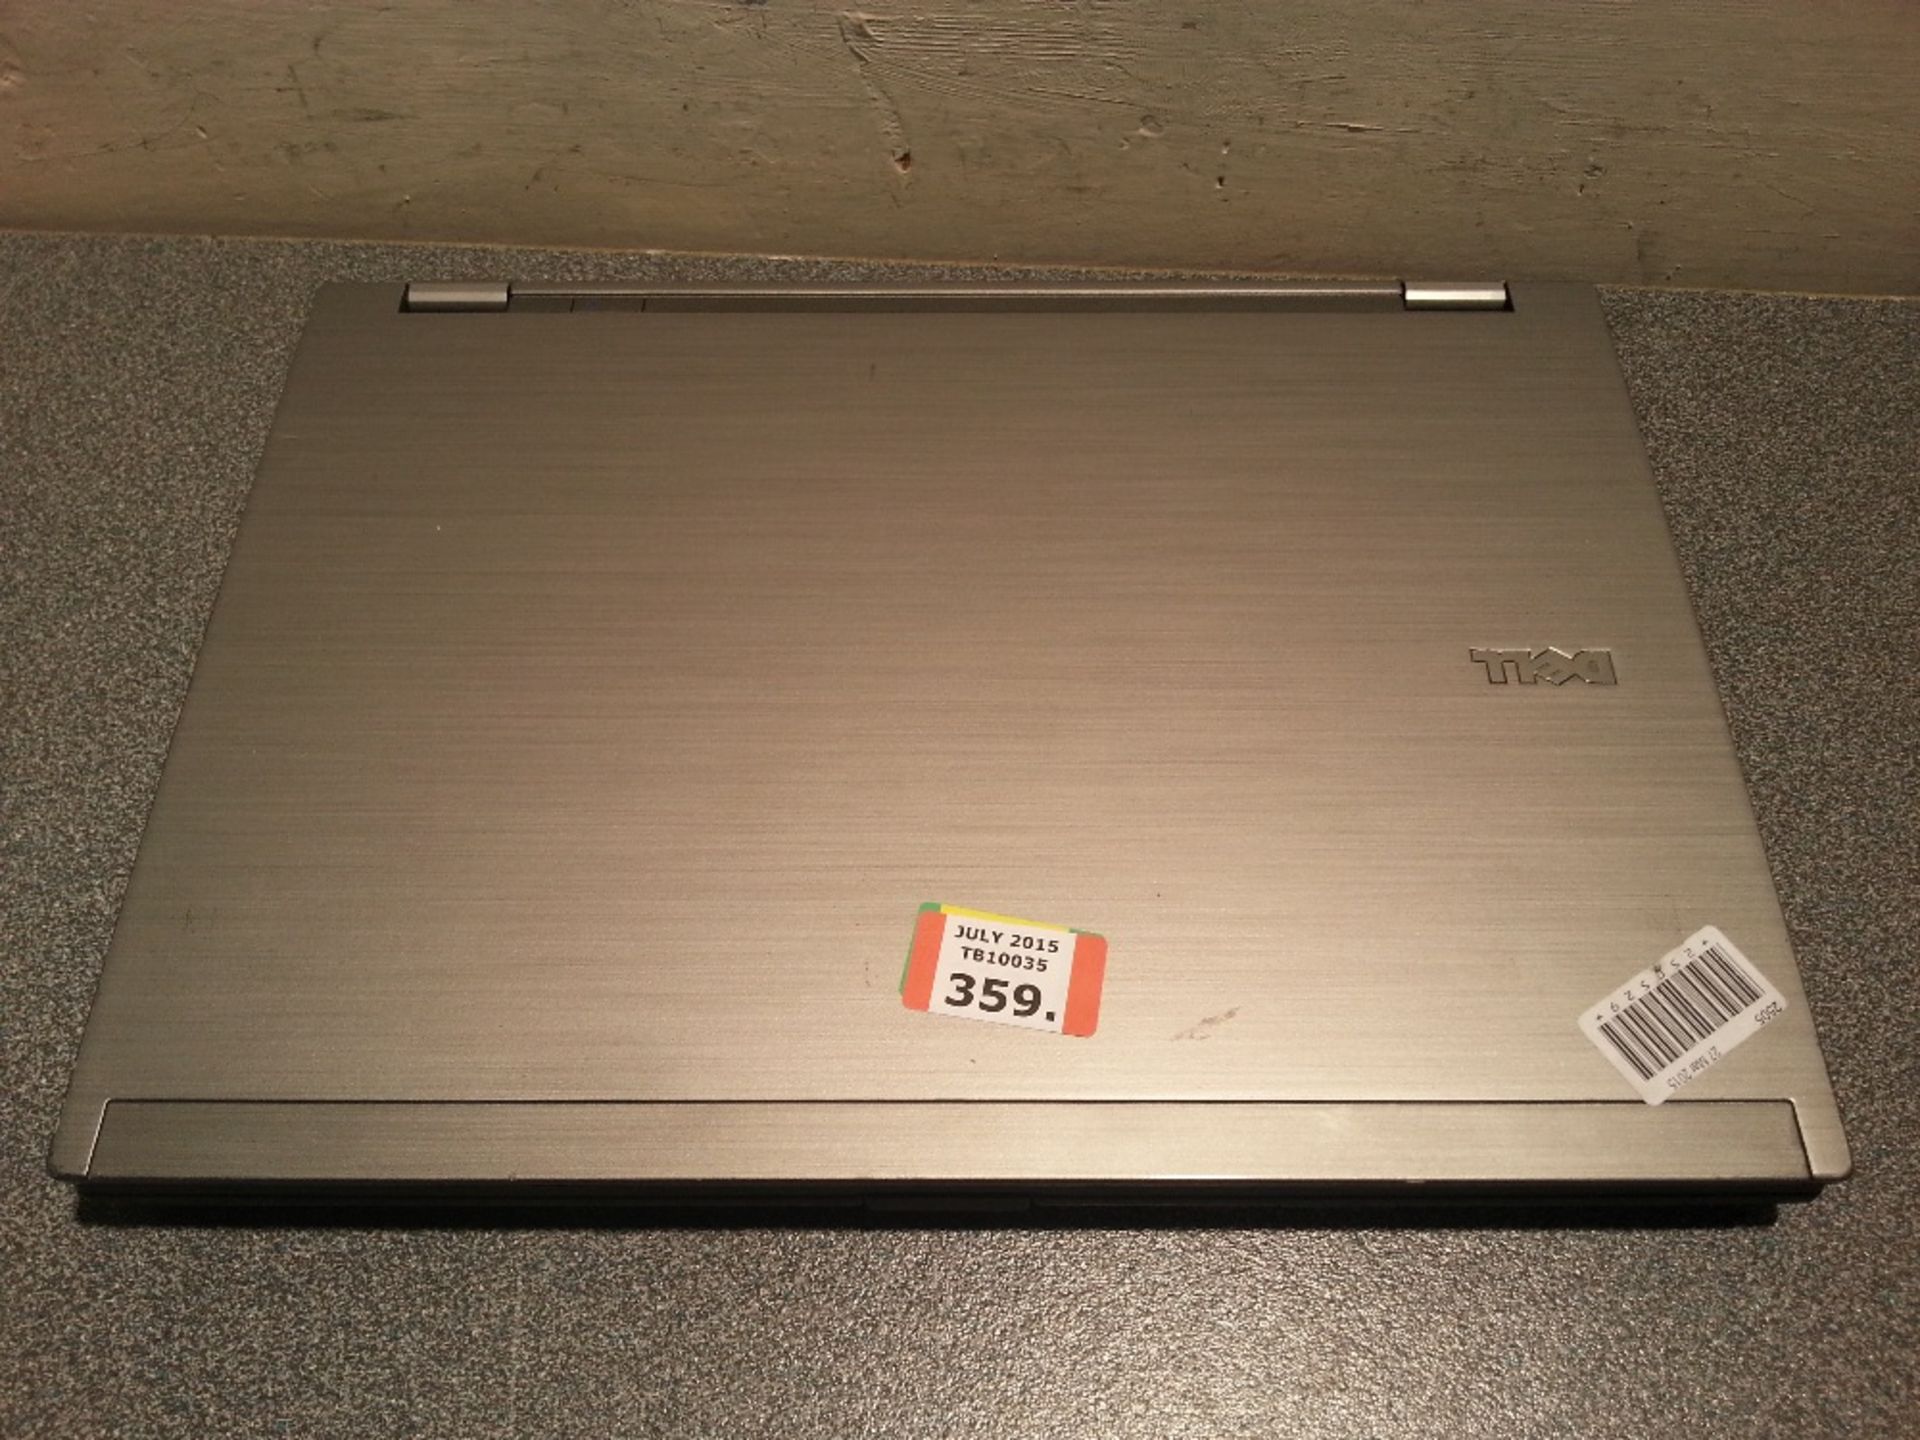 DELL E6410 Laptop - Intel Core i5 @ 2.53Ghz - 4GB Ram - 250GB Hdd - DVD RW - Webcam - Charger - - Image 3 of 3